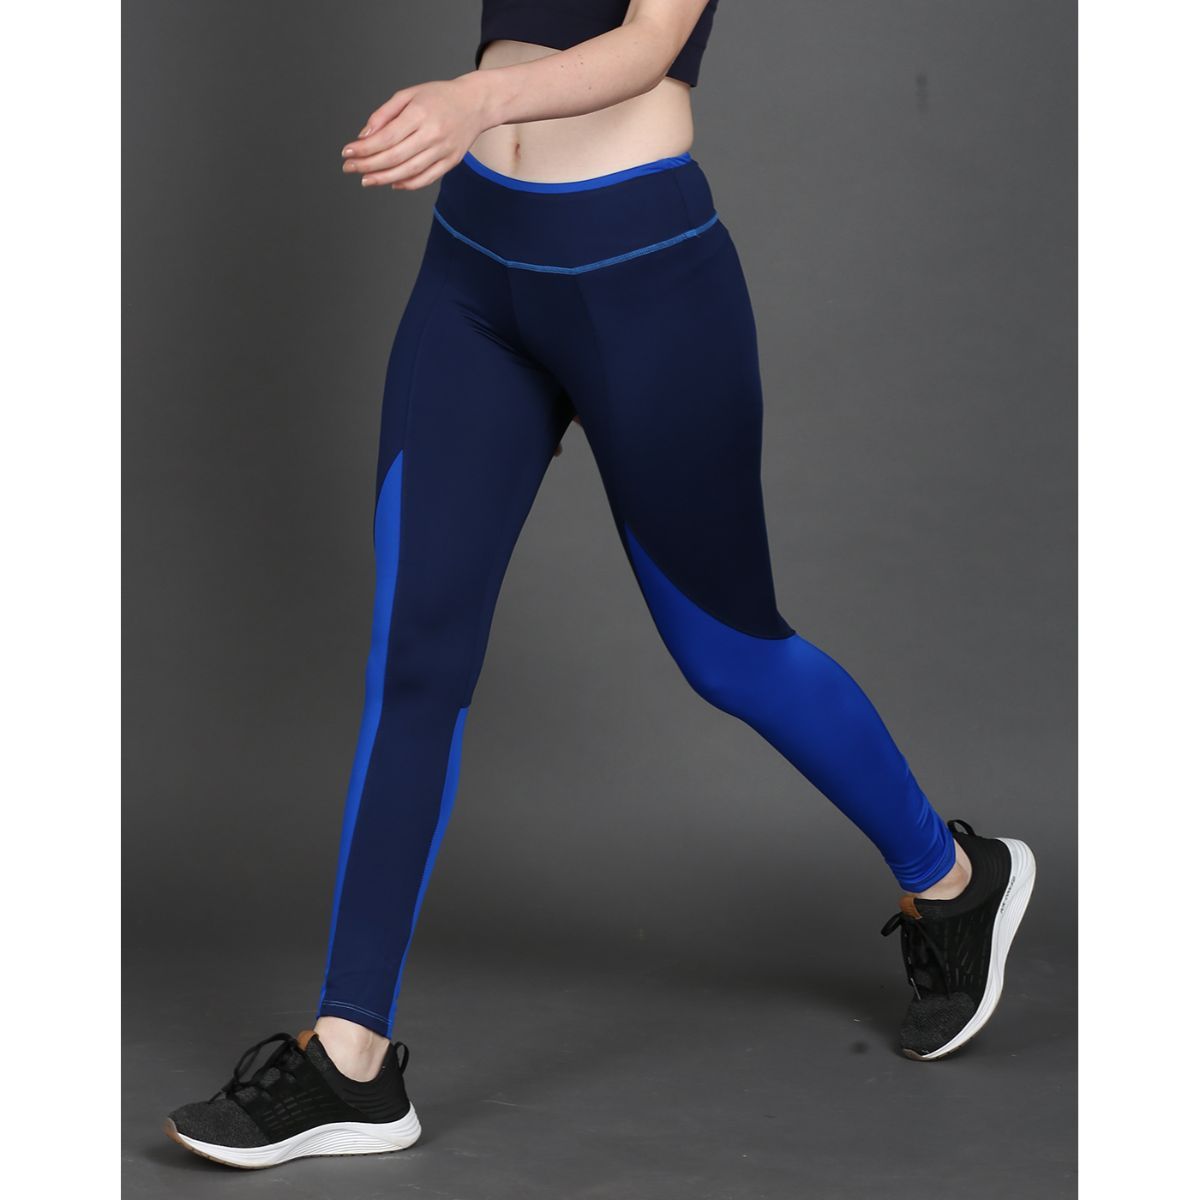 19 Best Leggings on Amazon for Women in 2022 Running Hiking Lounging  and Workout Options  SELF